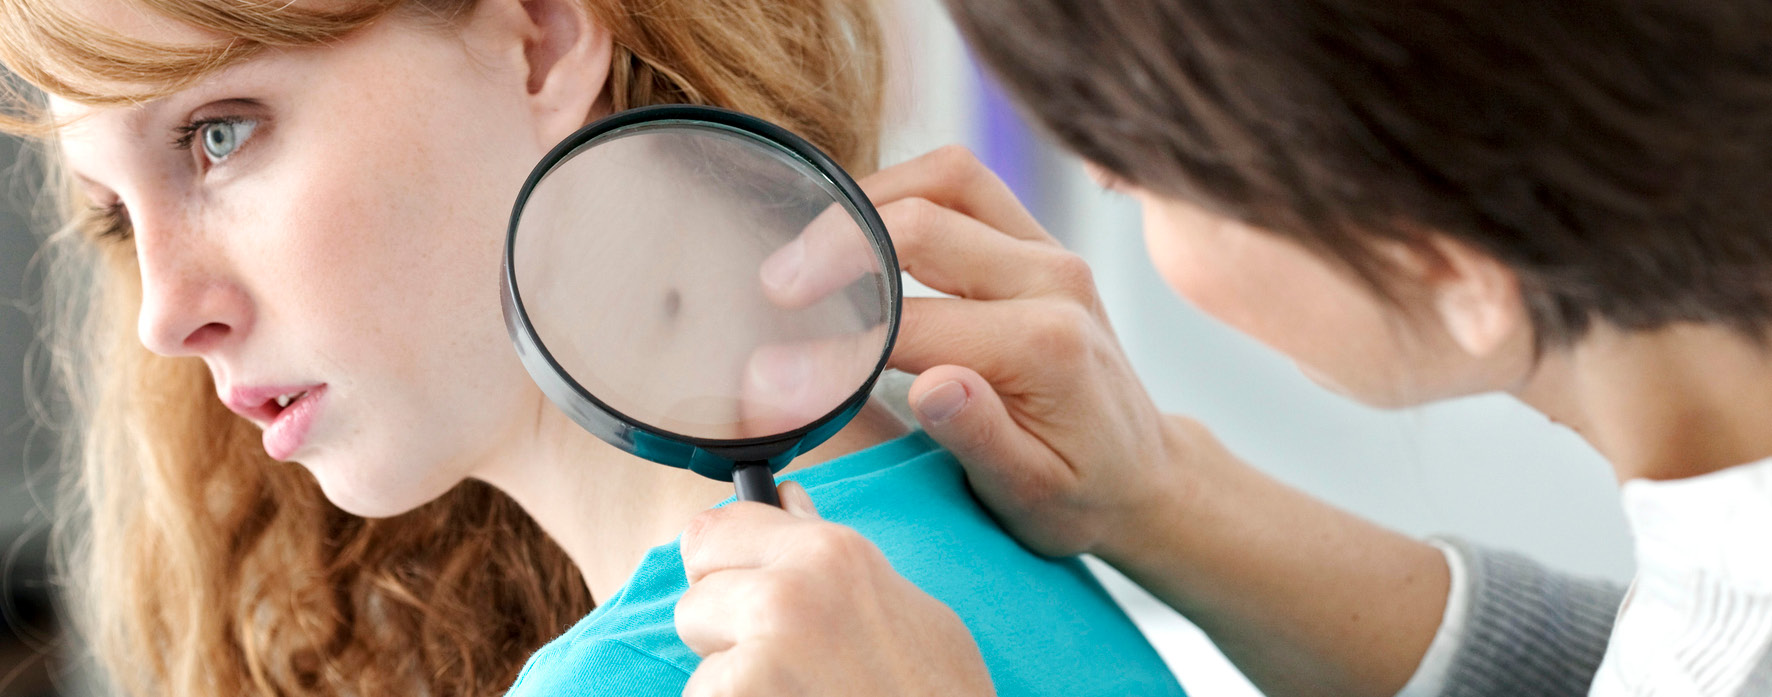 What is dermatology and what conditions do dermatologists treat?